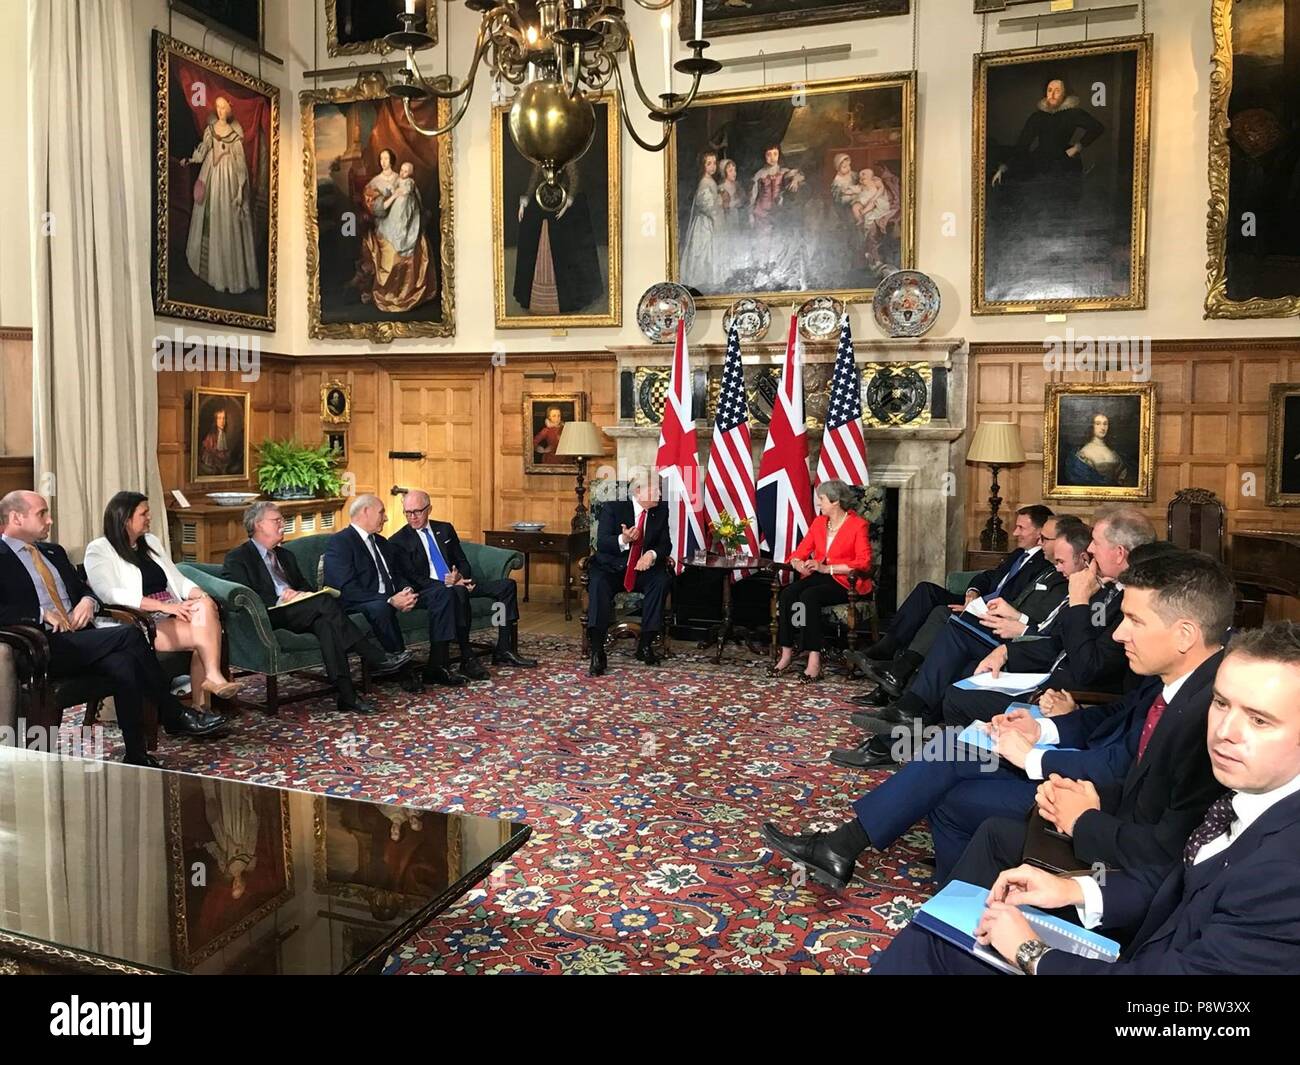 London, UK, 13 July 2018. U.S President Donald Trump and British Prime Minister Theresa May during bilateral talks at Chequers July 12, 2018 in Buckinghamshire, England. Chequers is the country residence of the Prime Minister. Credit: Planetpix/Alamy Live News Stock Photo